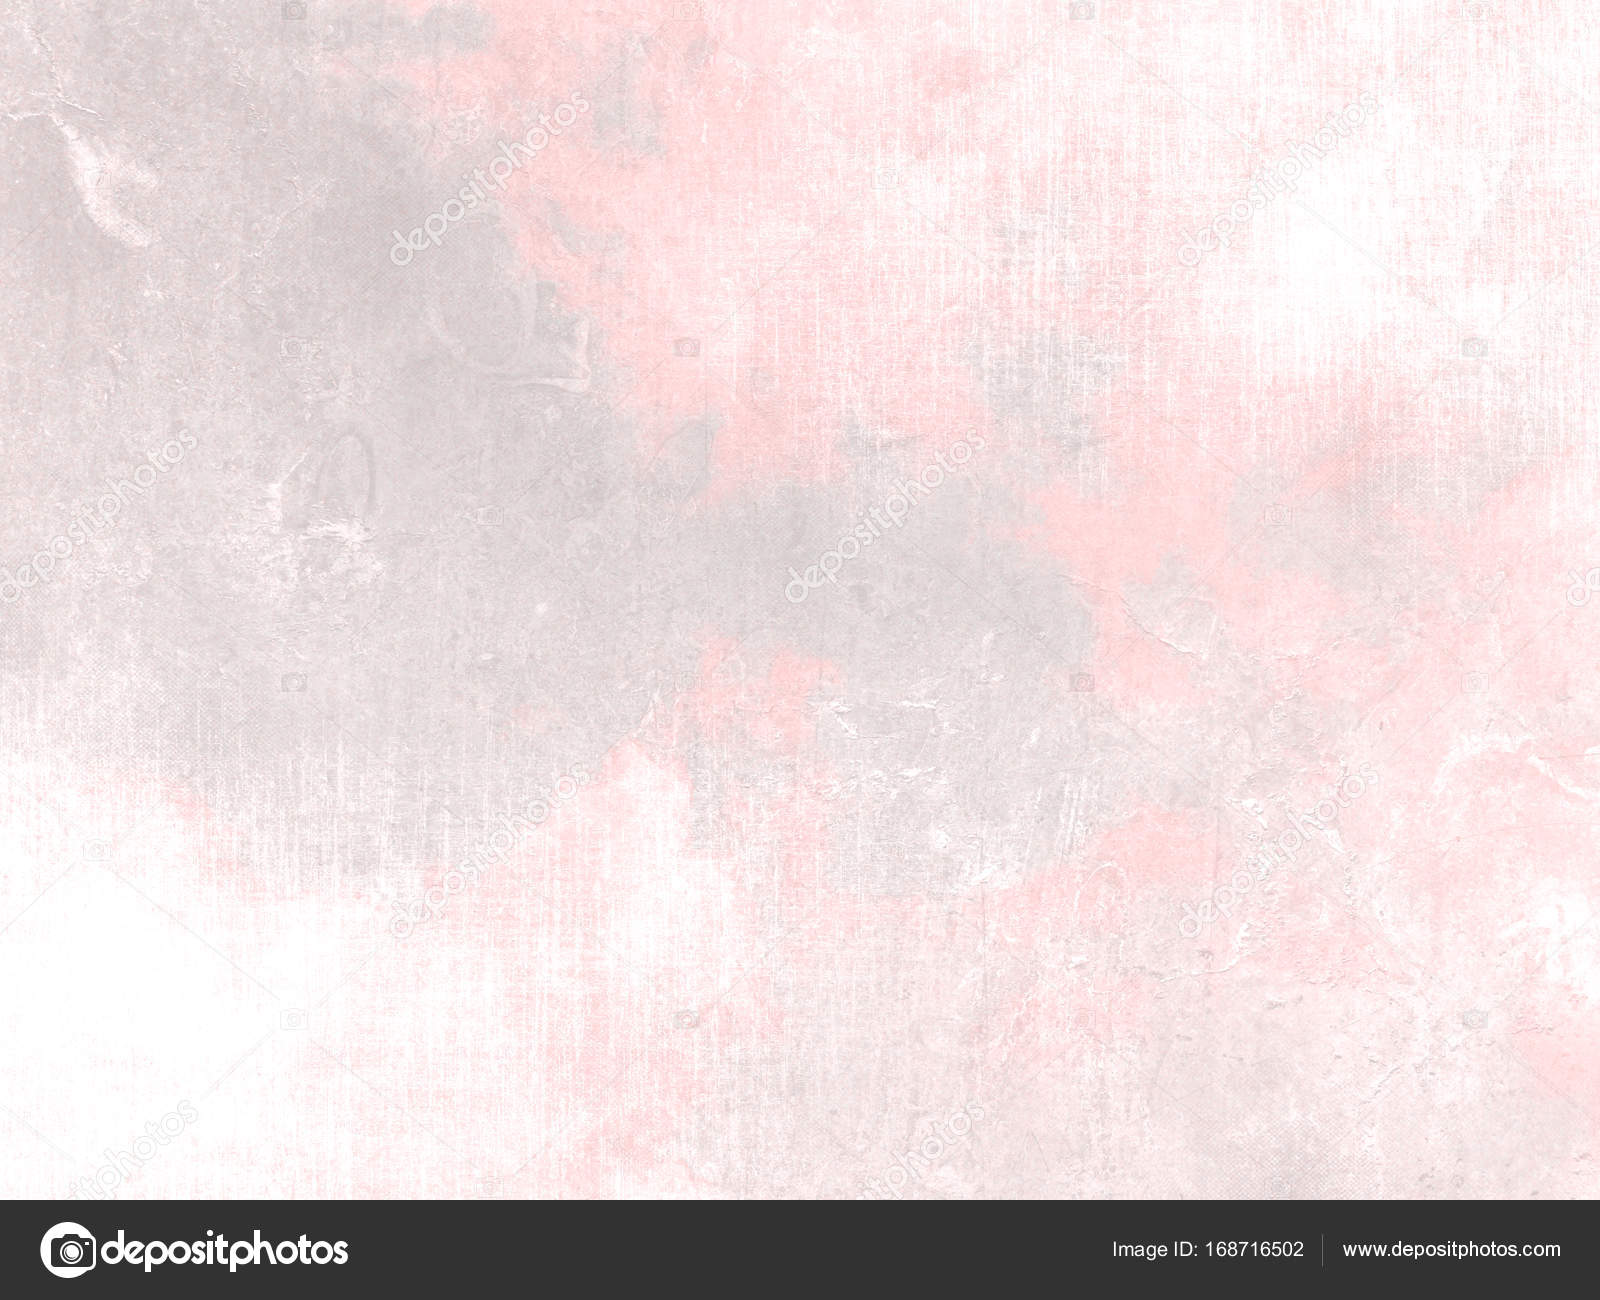 Soft pink grey background texture in pale watercolor - abstract